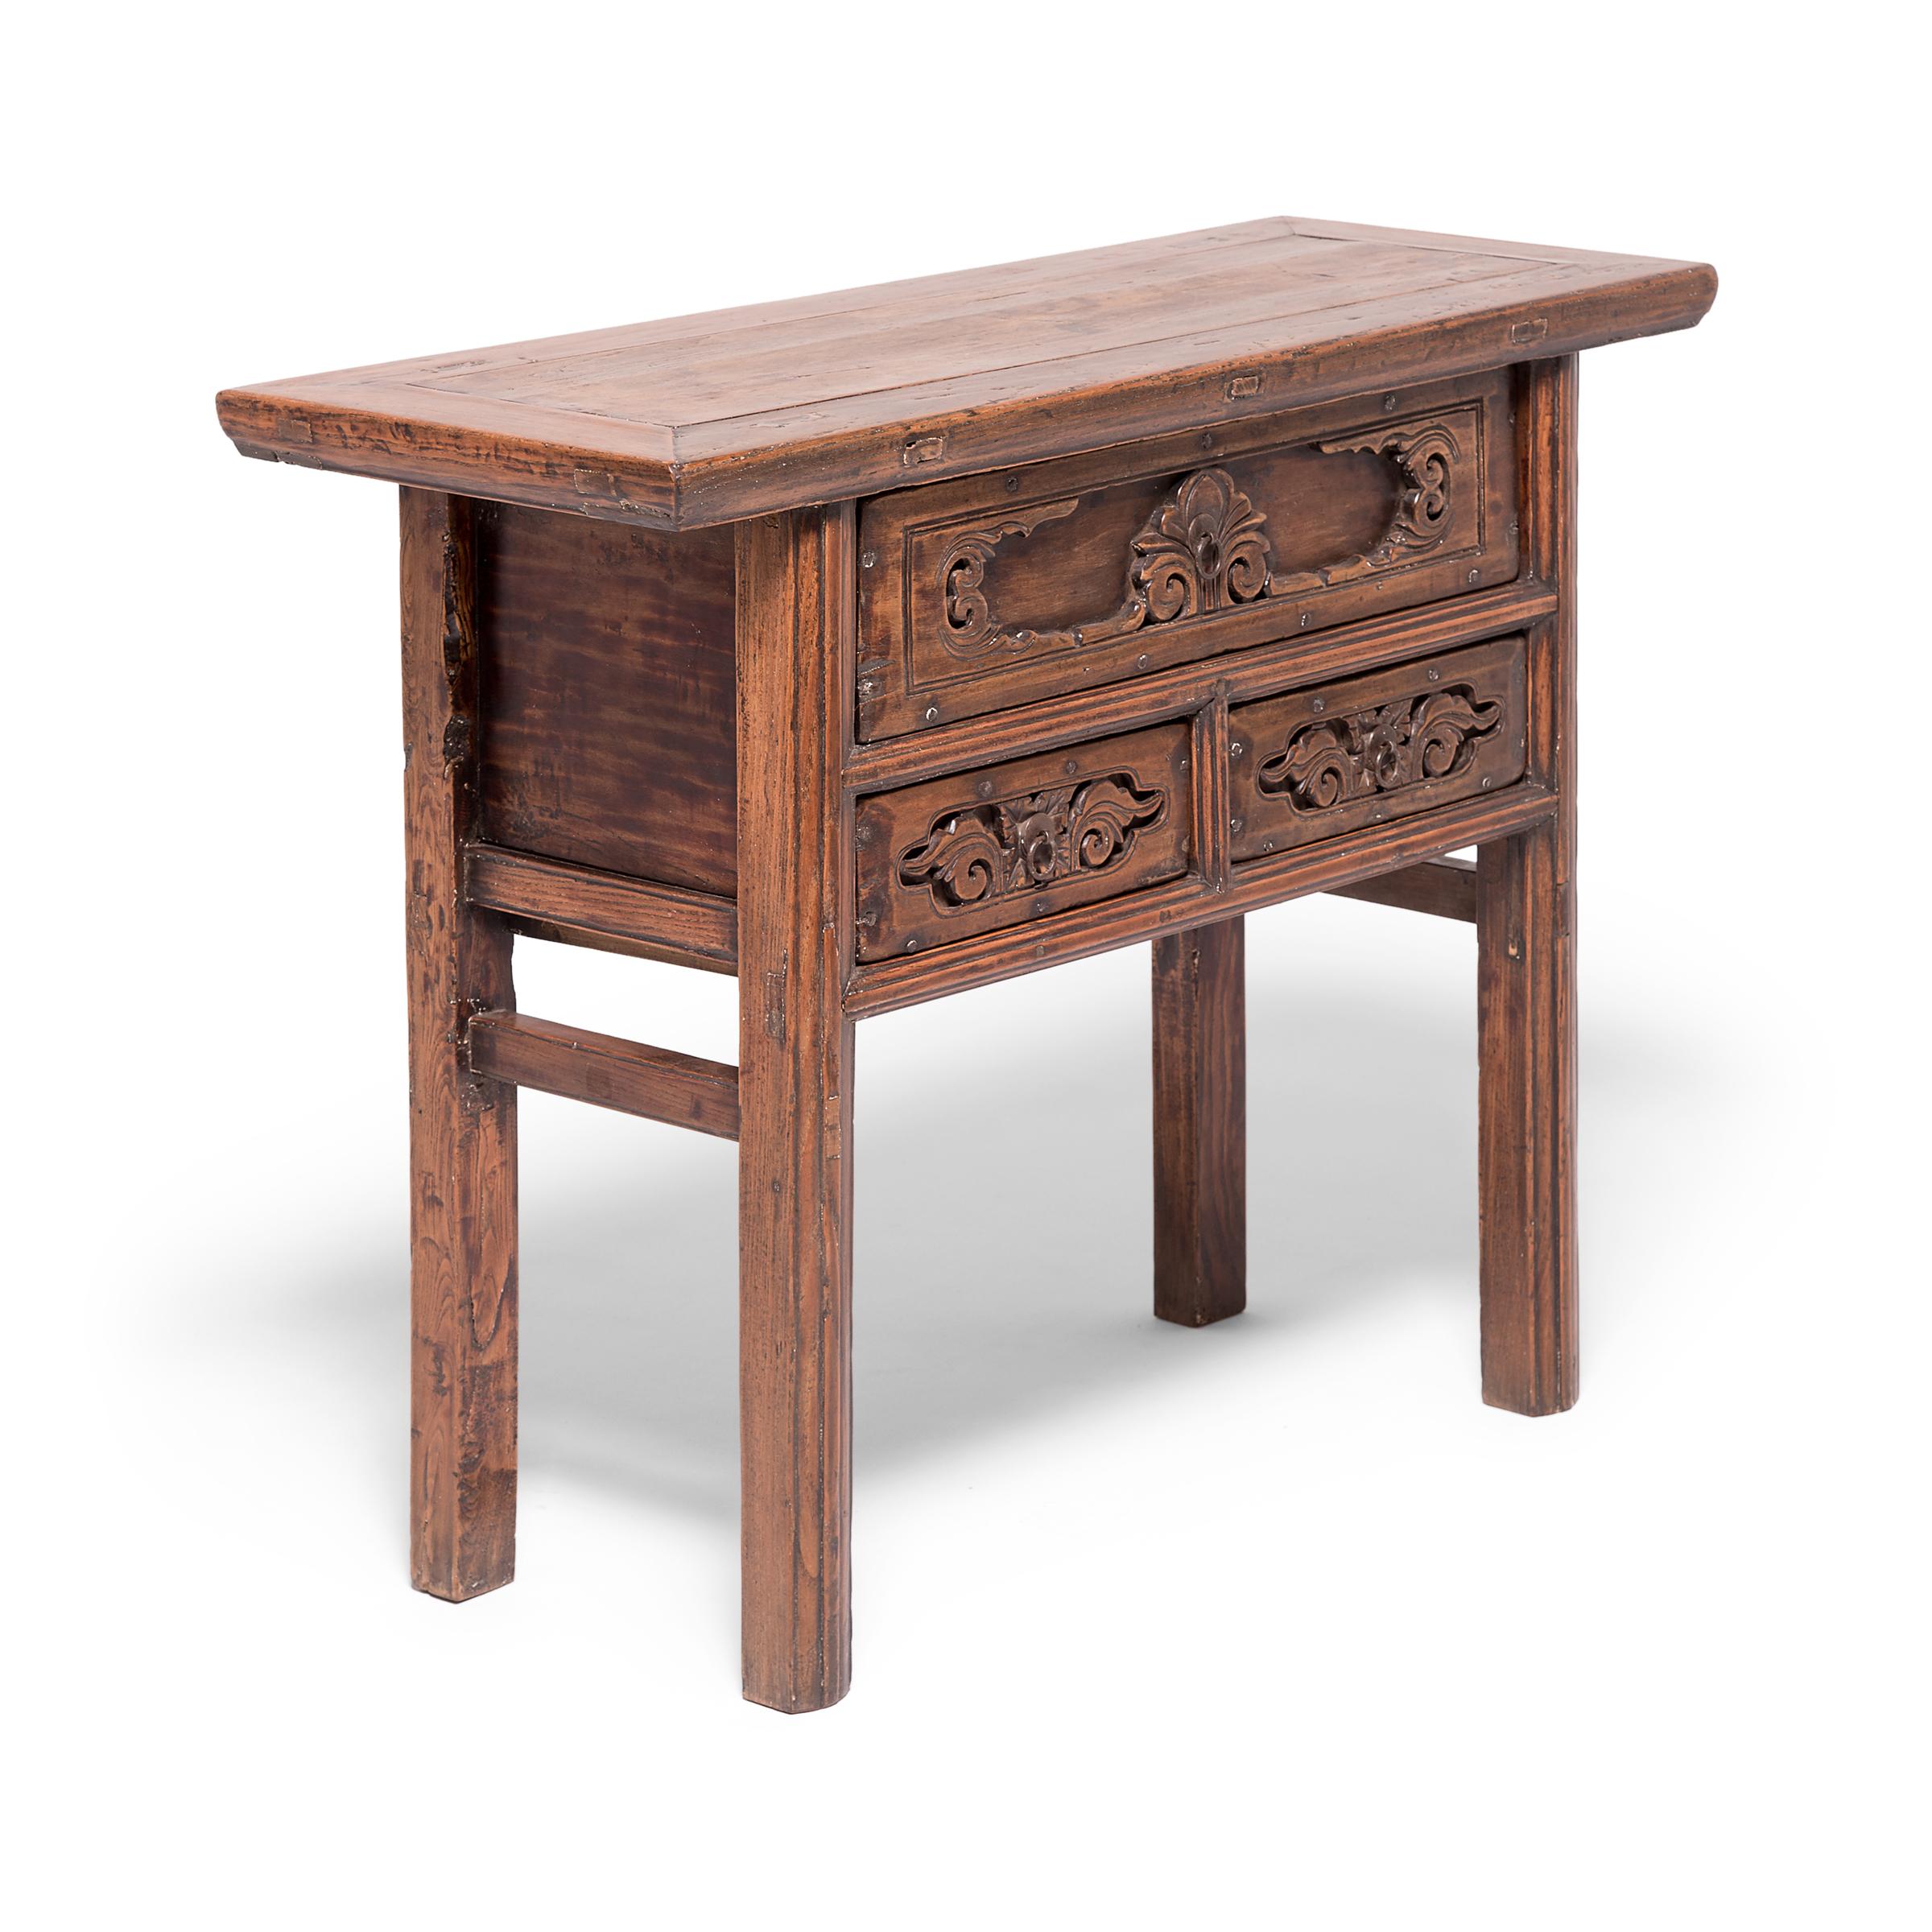 Hand-Carved Chinese Three-Drawer Console Table, c. 1850